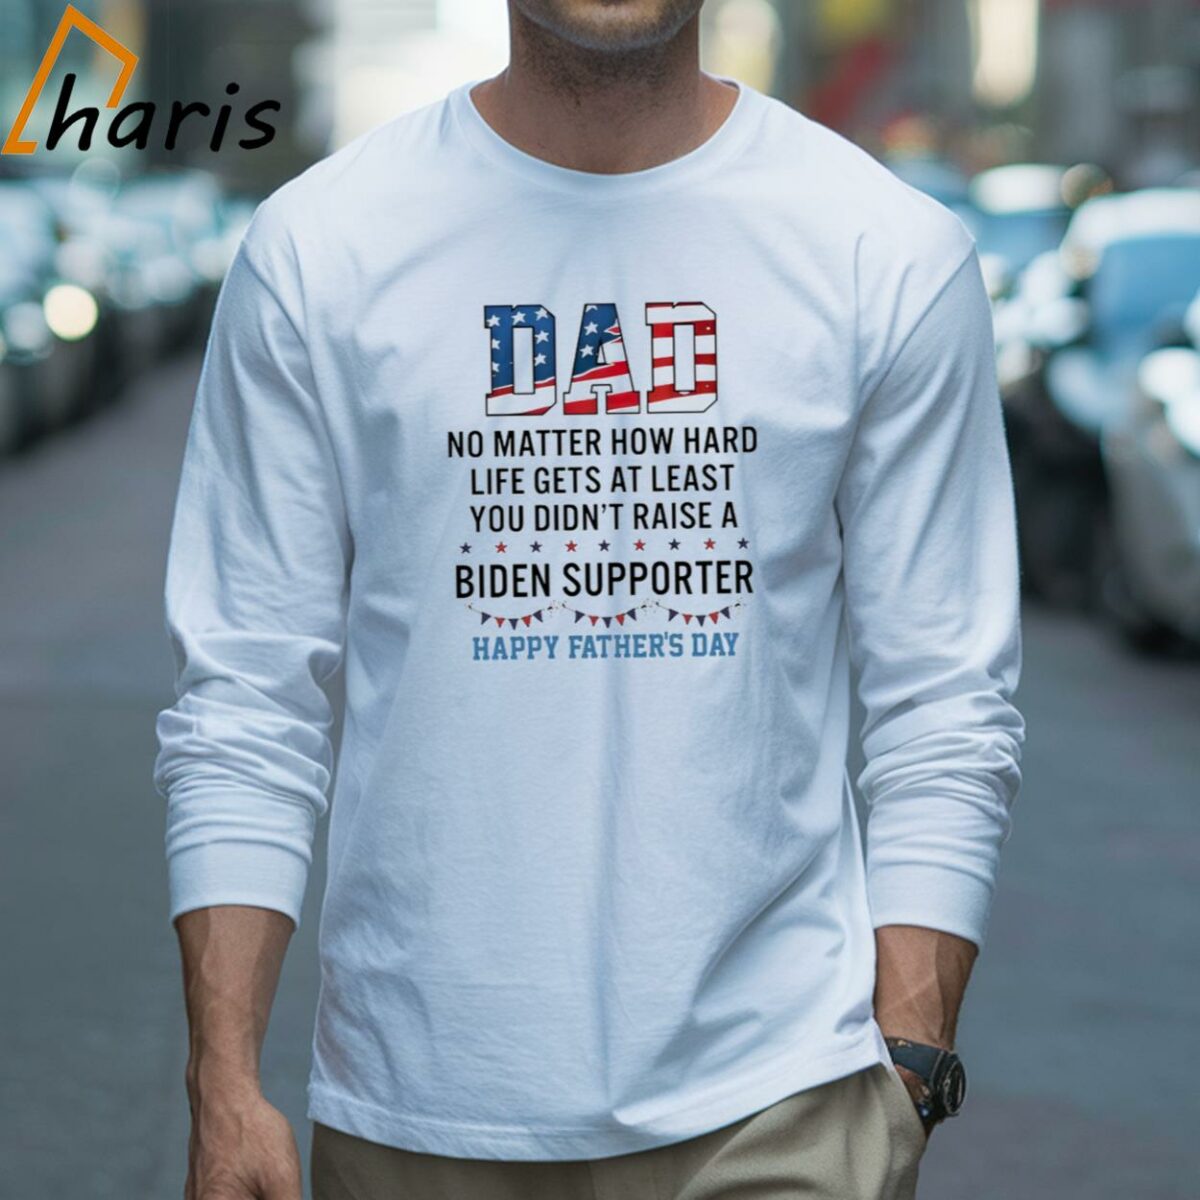 Dad No Matter How Hard Life Gets At Least You Didnt Raise A Biden Supporter Happy Fathers Day T shirt 3 Long sleeve shirt